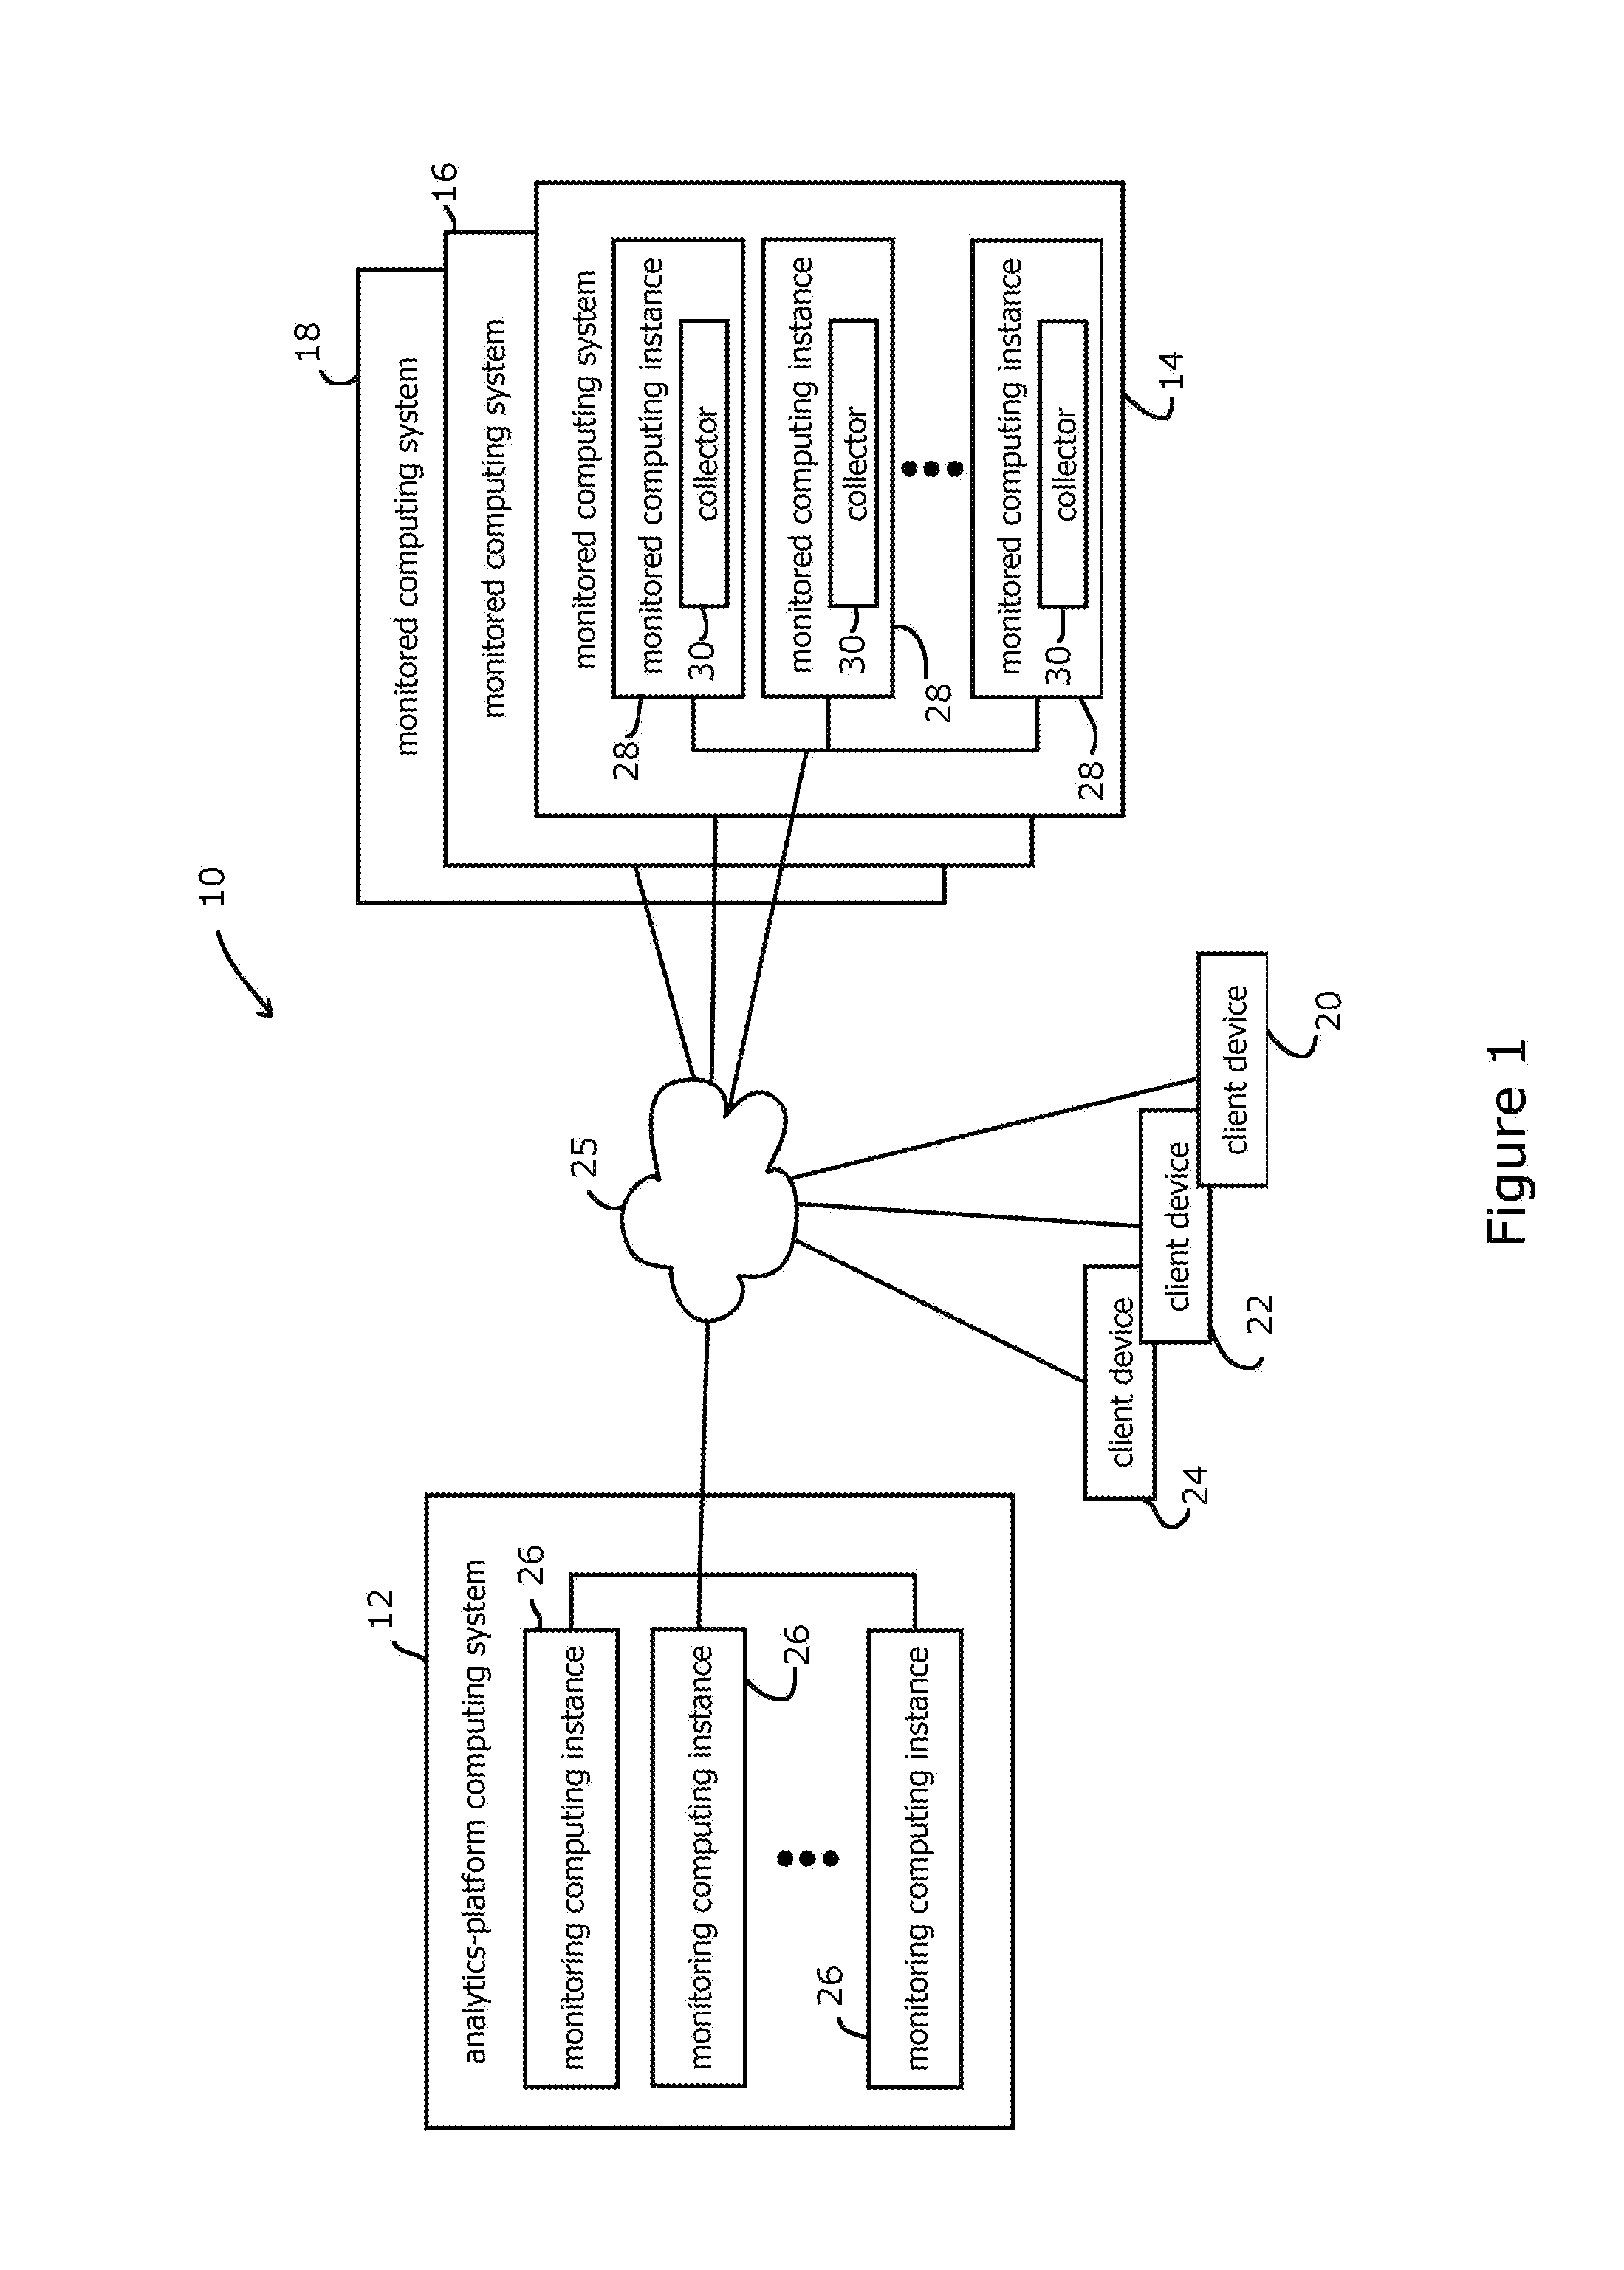 System for monitoring elastic cloud-based computing systems as a service